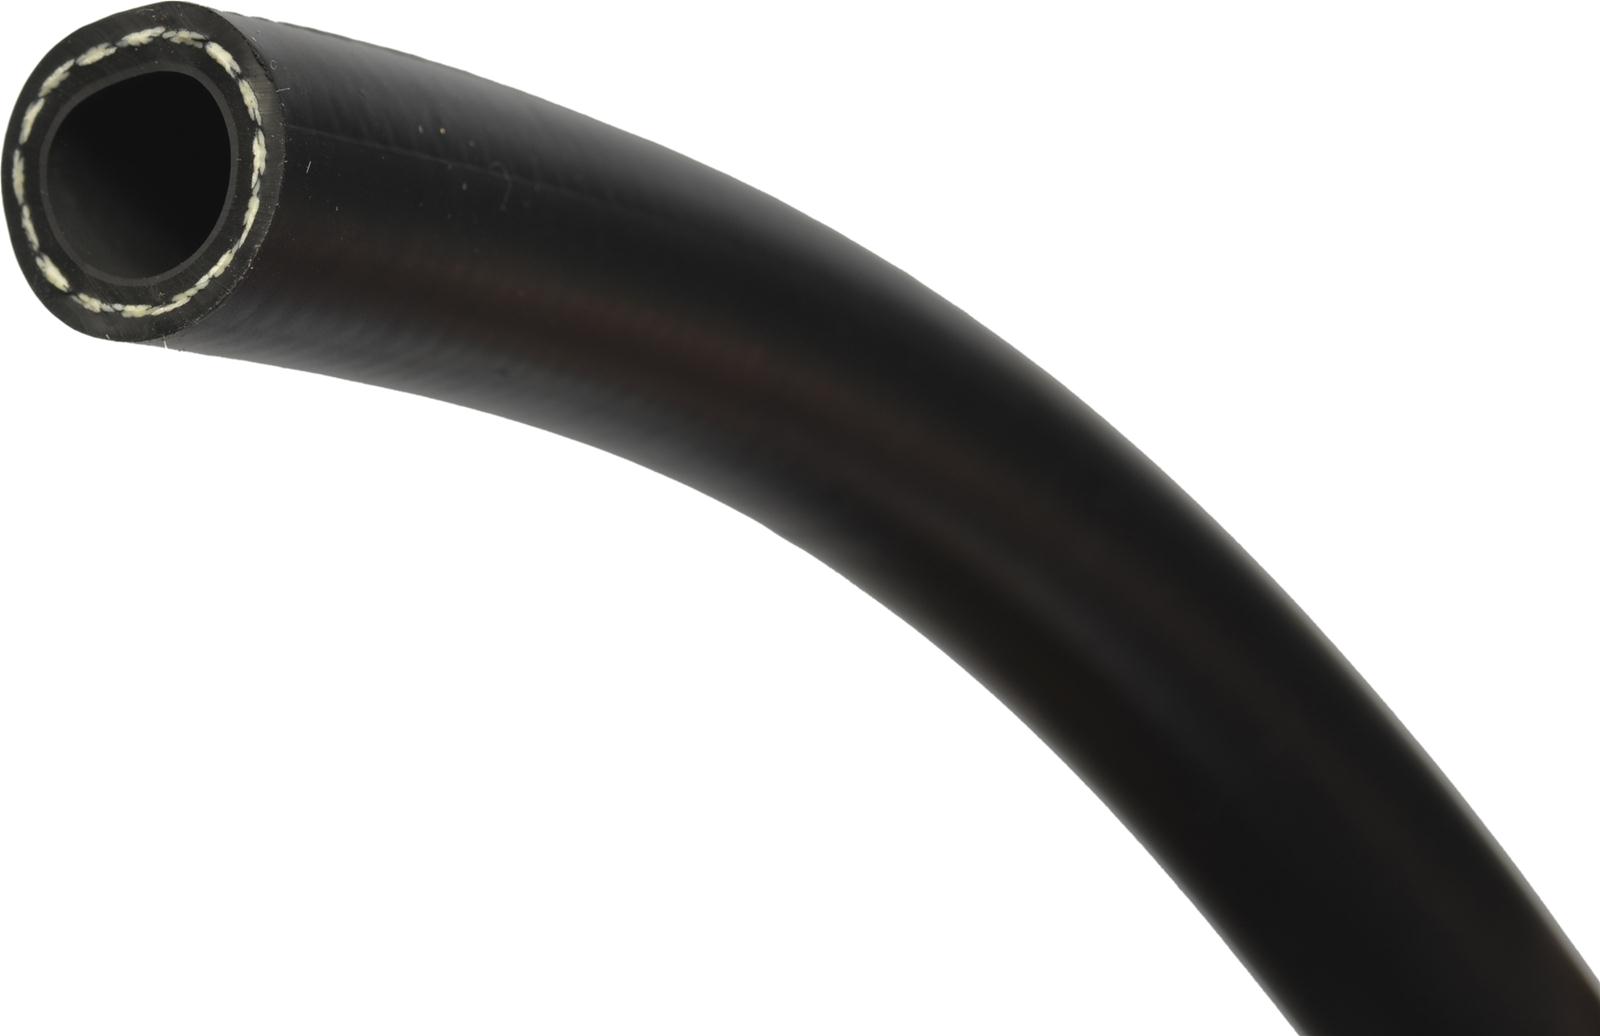 6AN PTFE Black Stainless Steel Hose / Line (E85 + Race Fuel Safe) – BY THE  FOOT